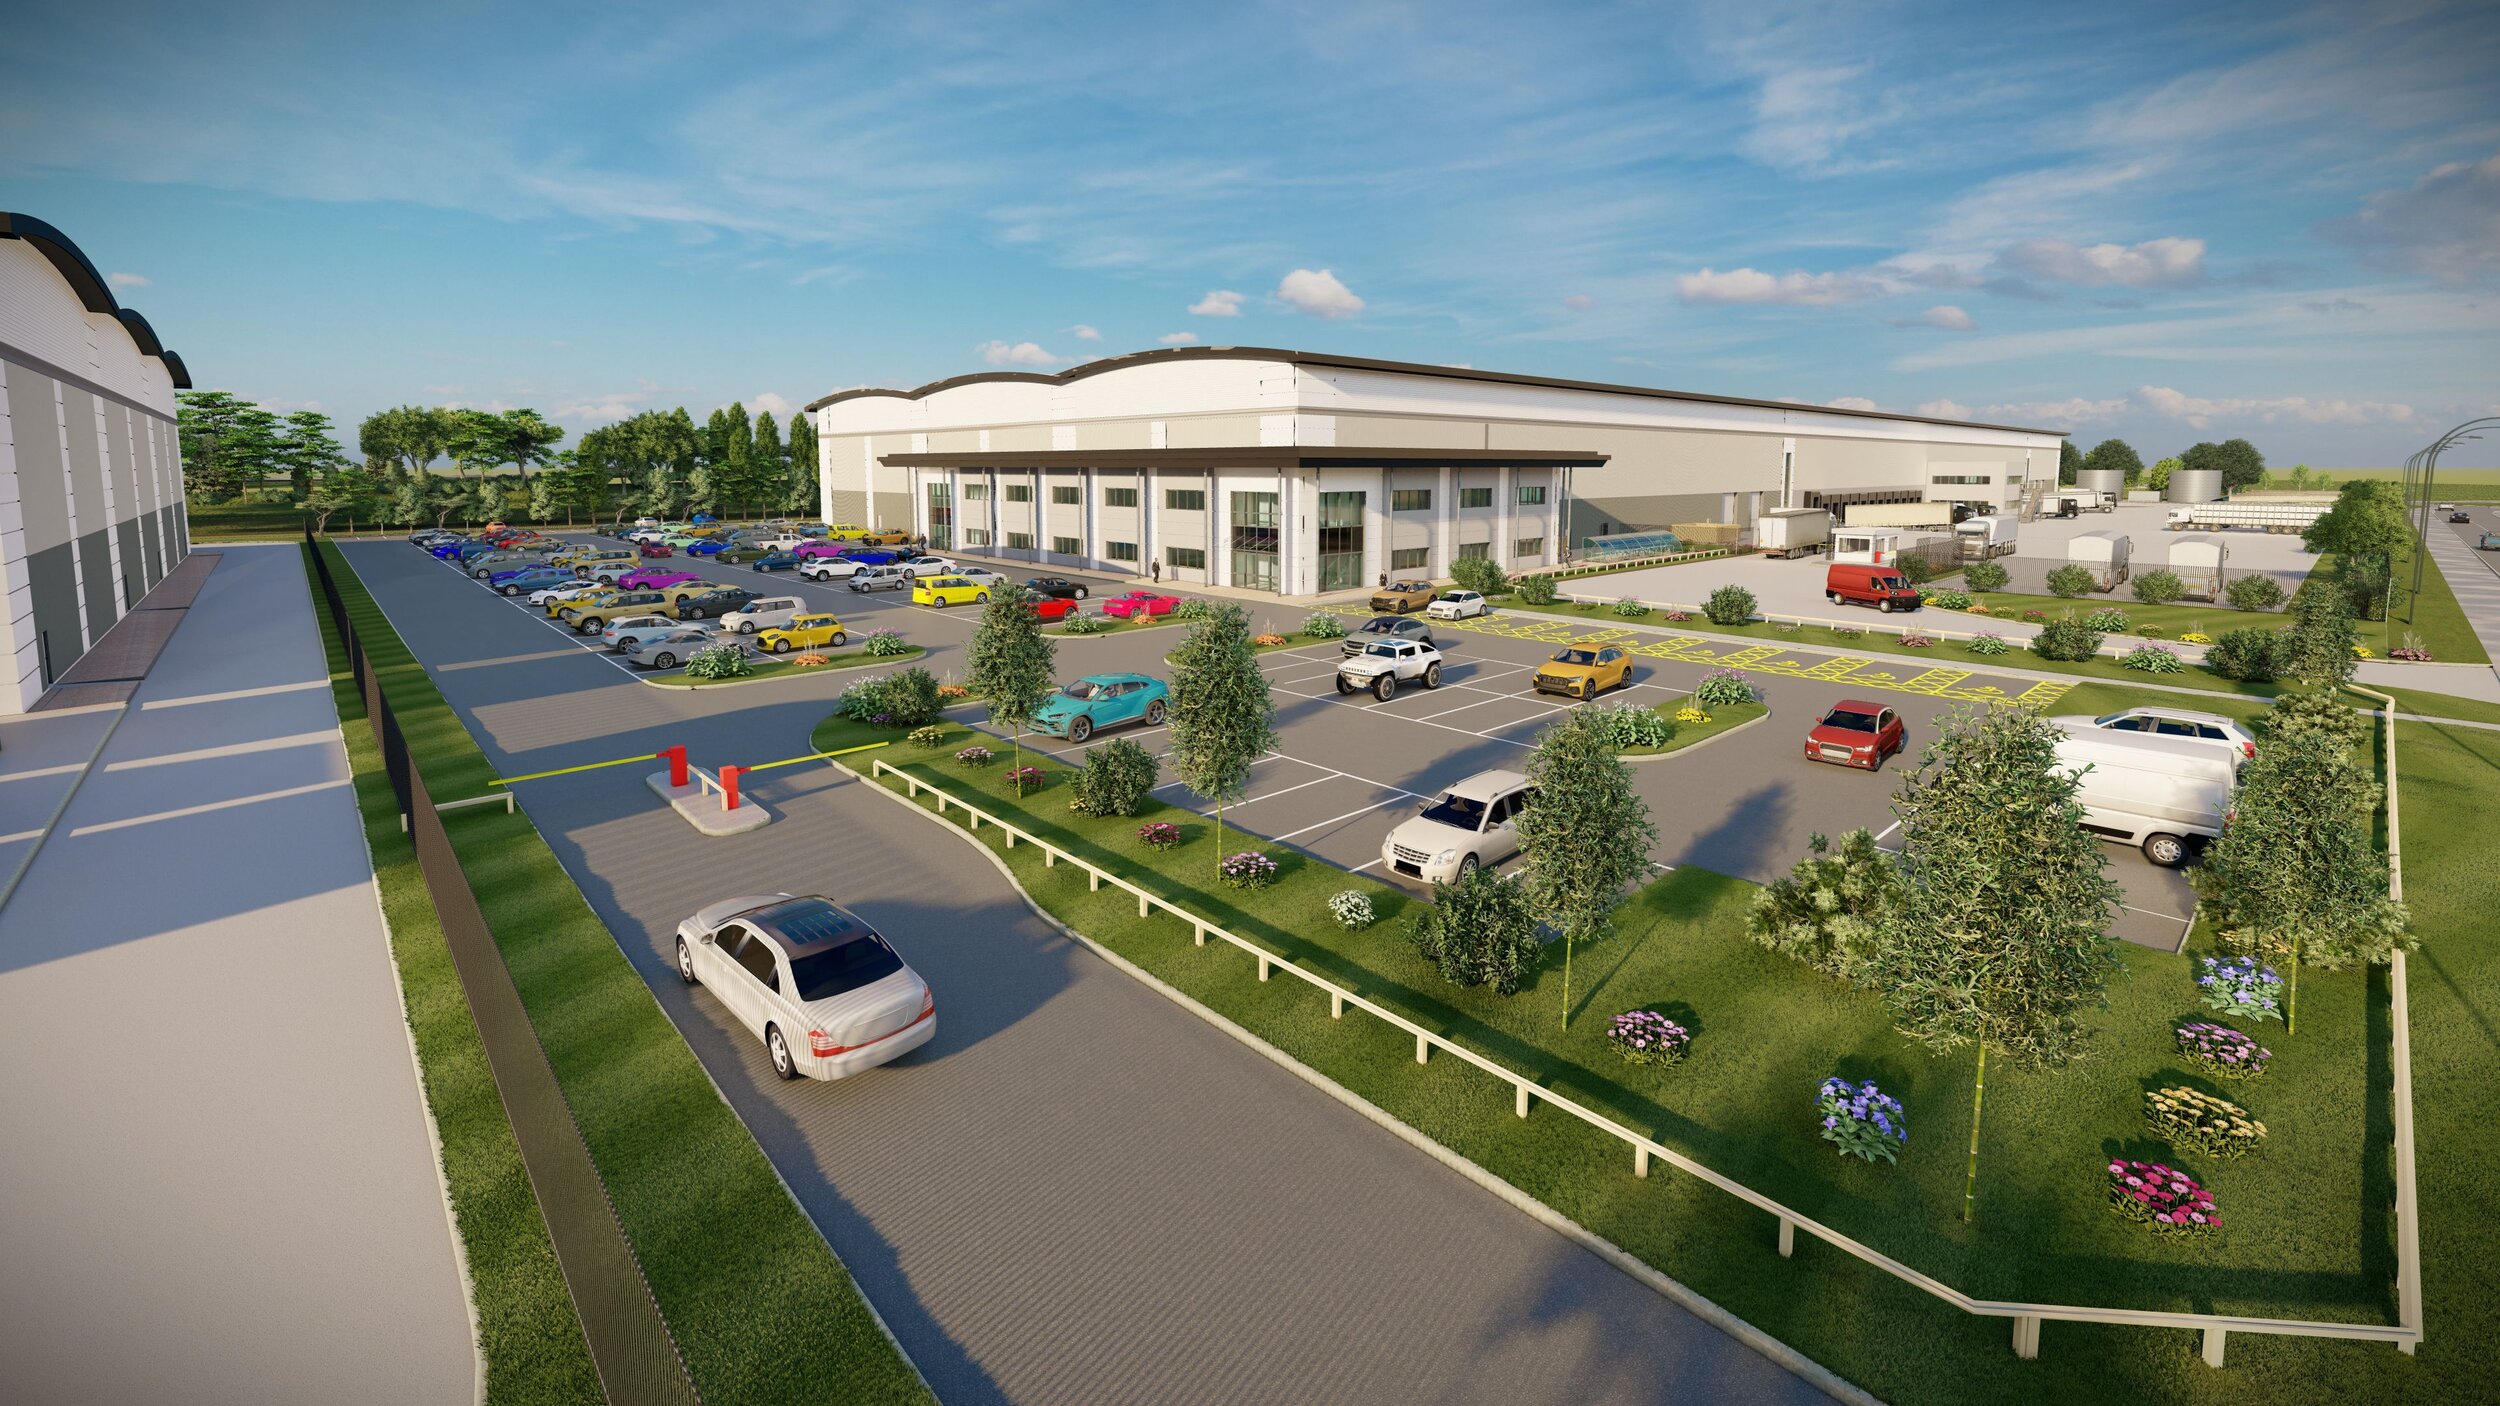 Developer in £100m deal with insurance giant to build logistics facilities